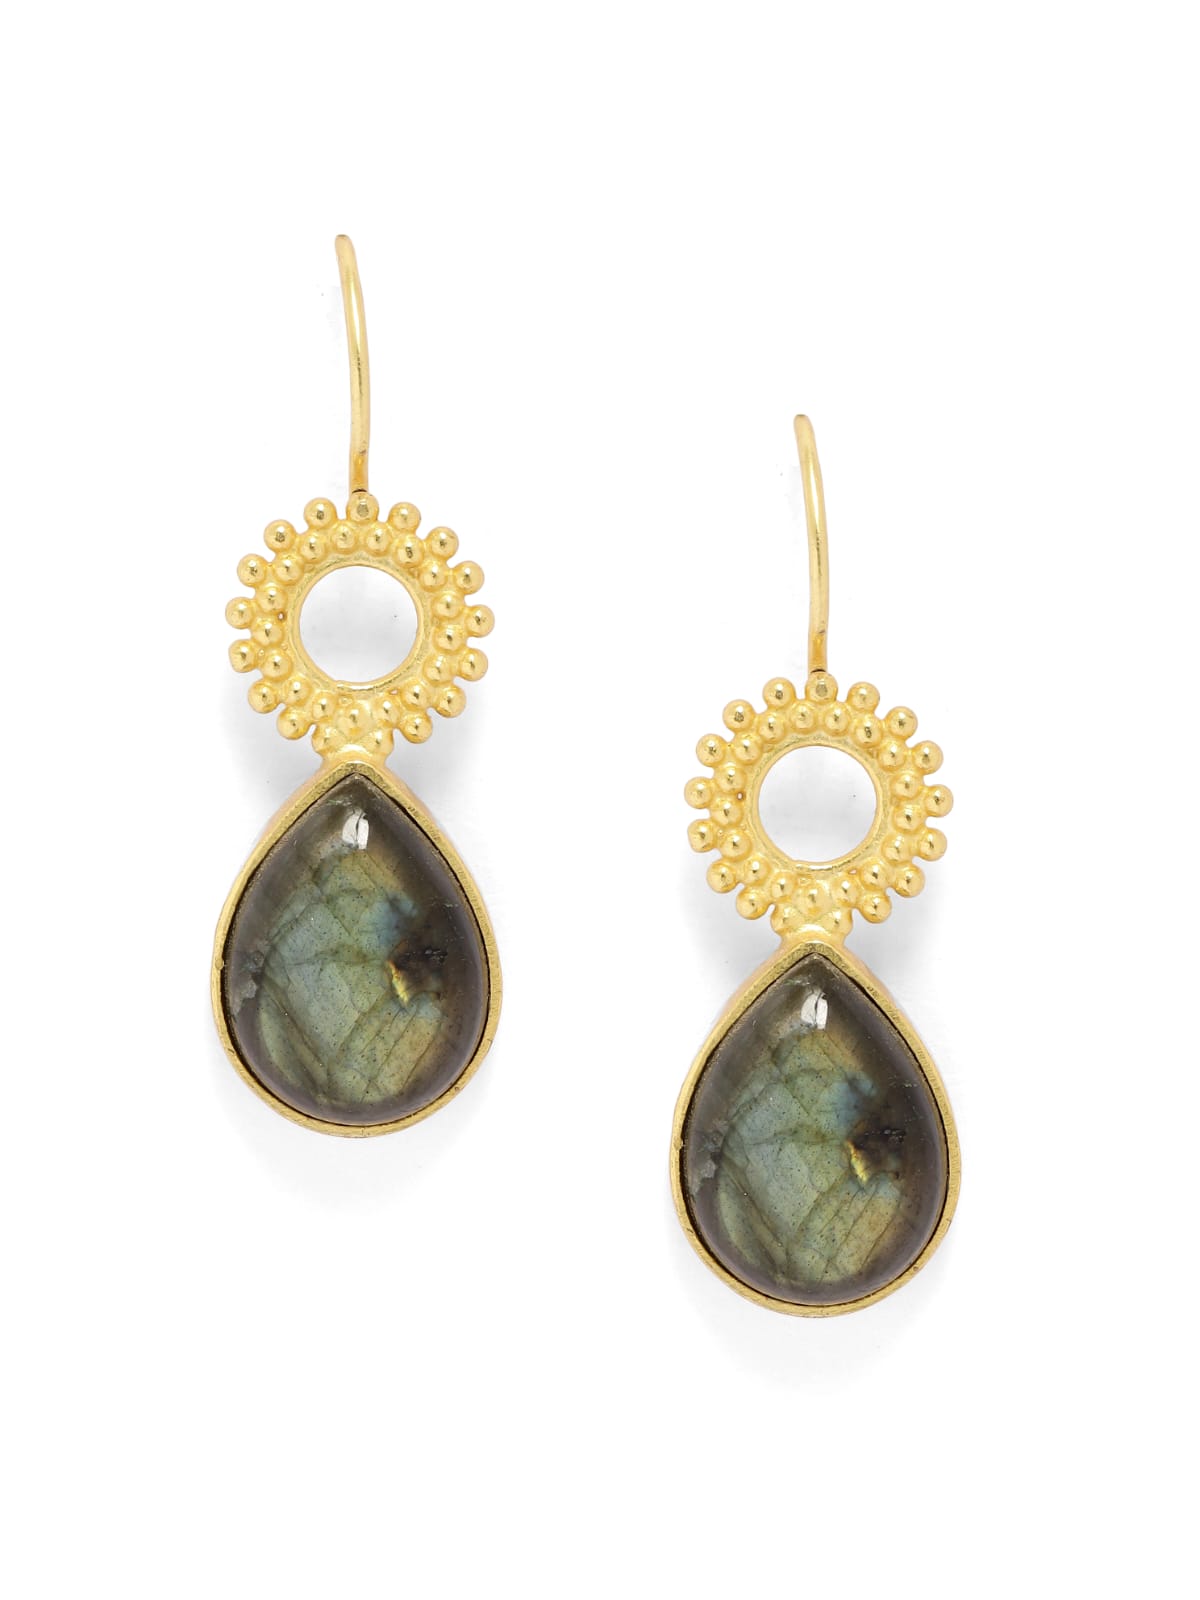 Sterling Silver hook earrings with Labradorites in micron Gold plated.